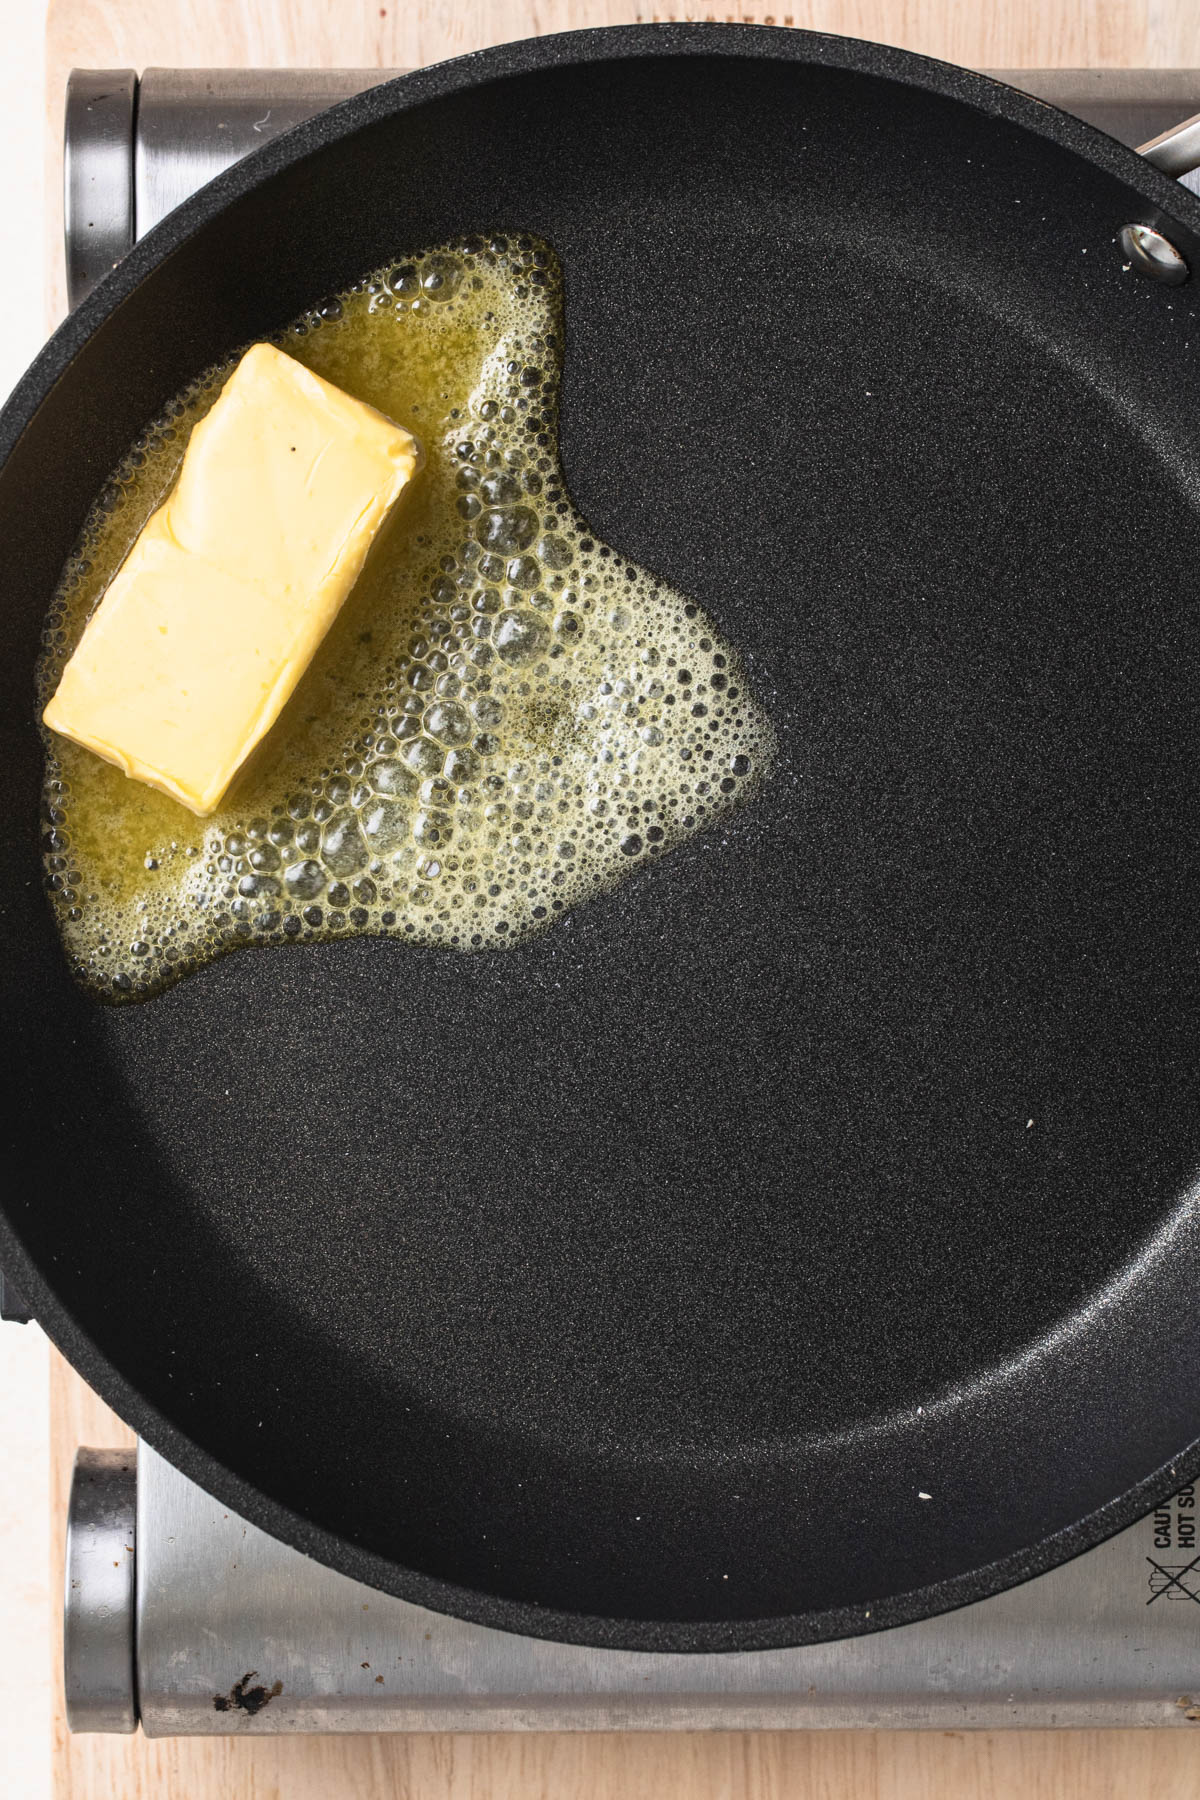 Butter melting in a black frypan.